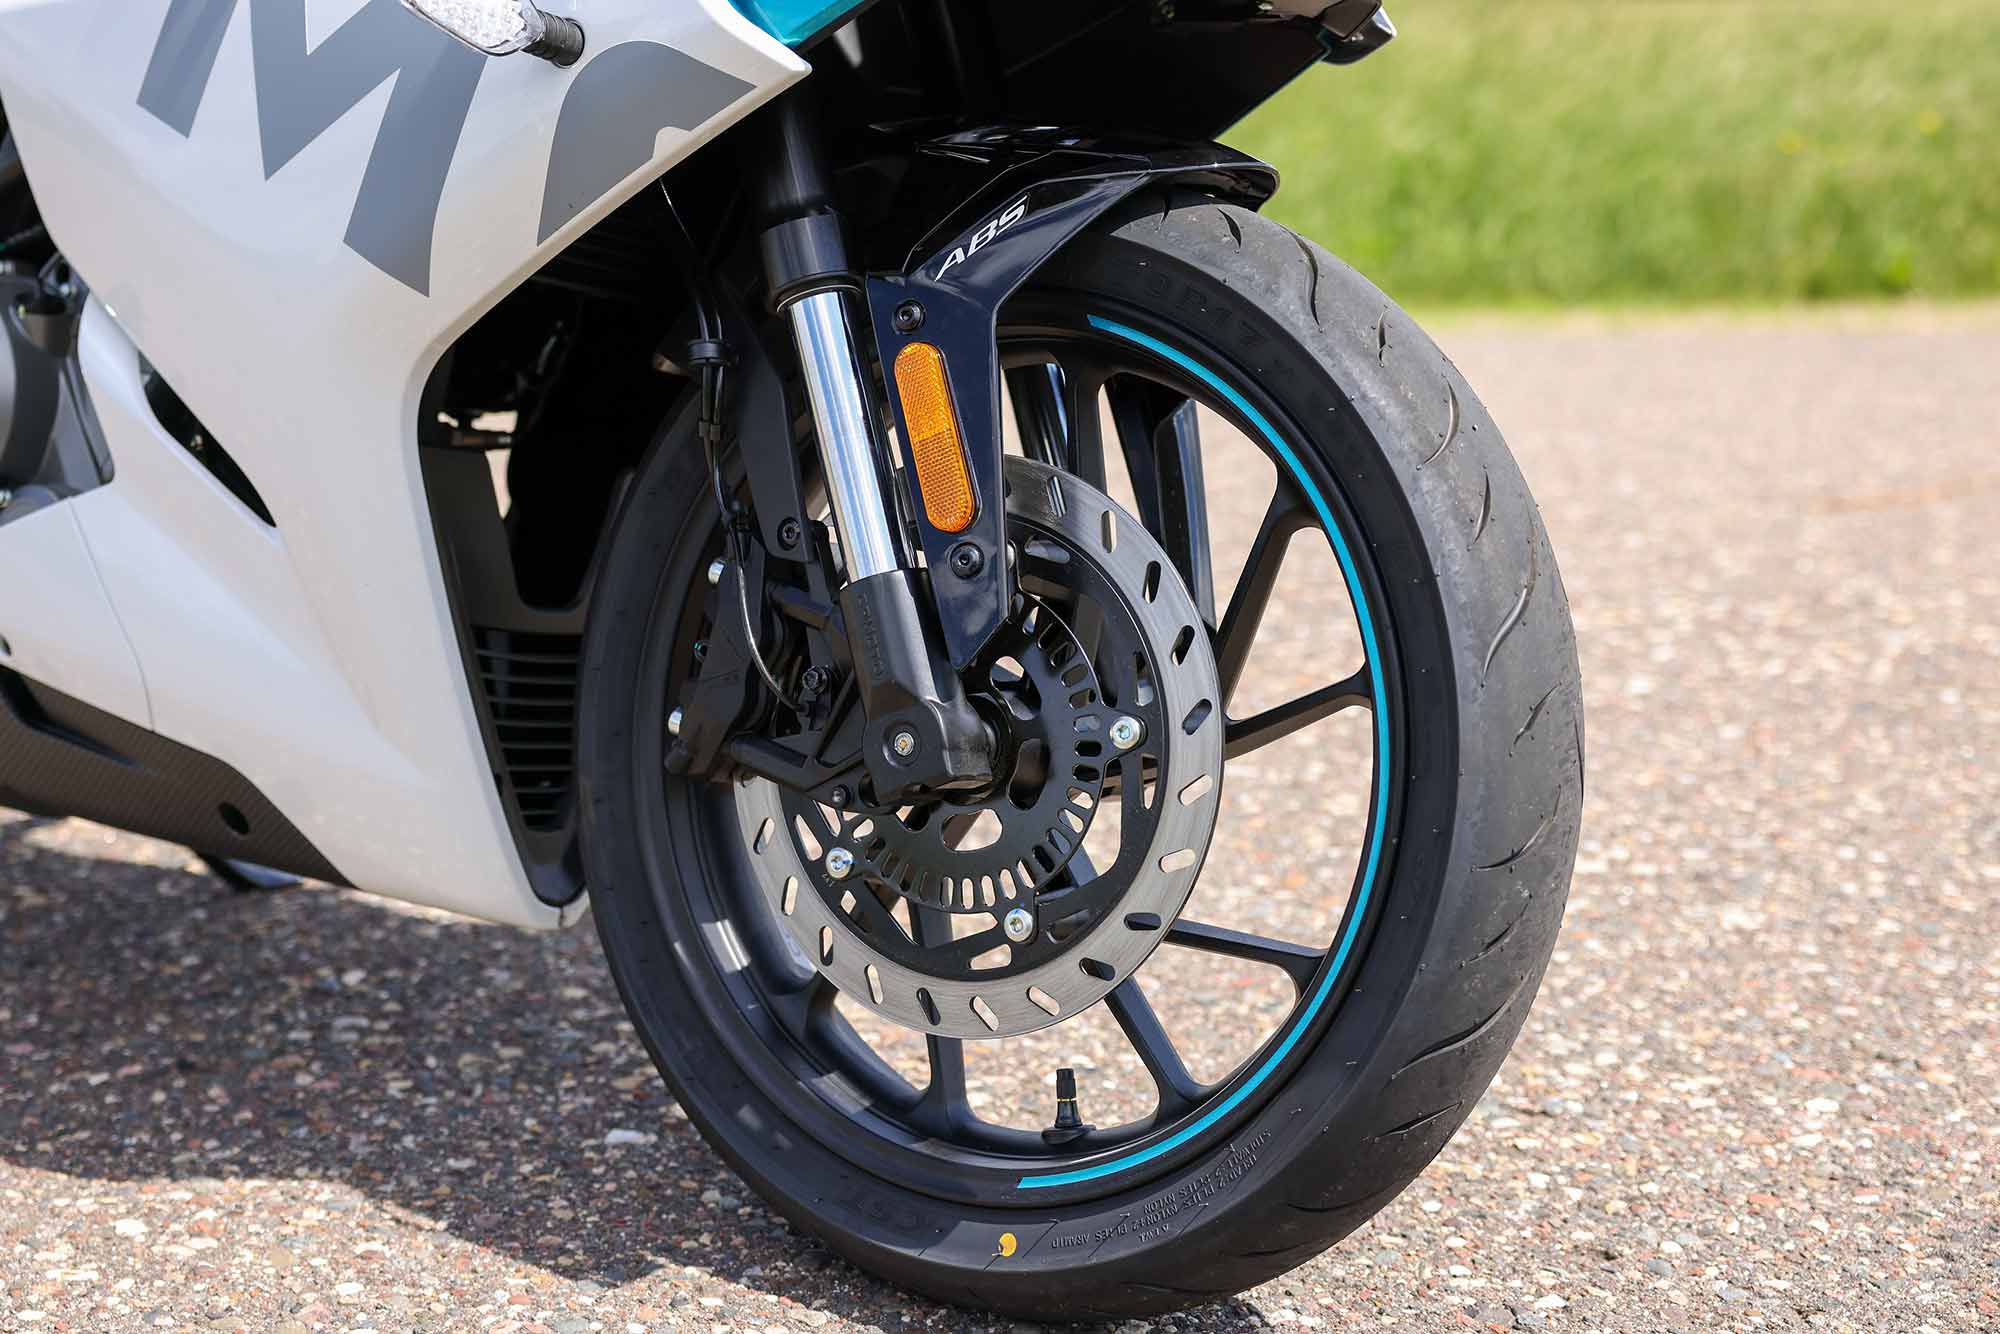 Front brake package consists of a 300mm disc and four-piston caliper. Notice the design touches on the wheel.